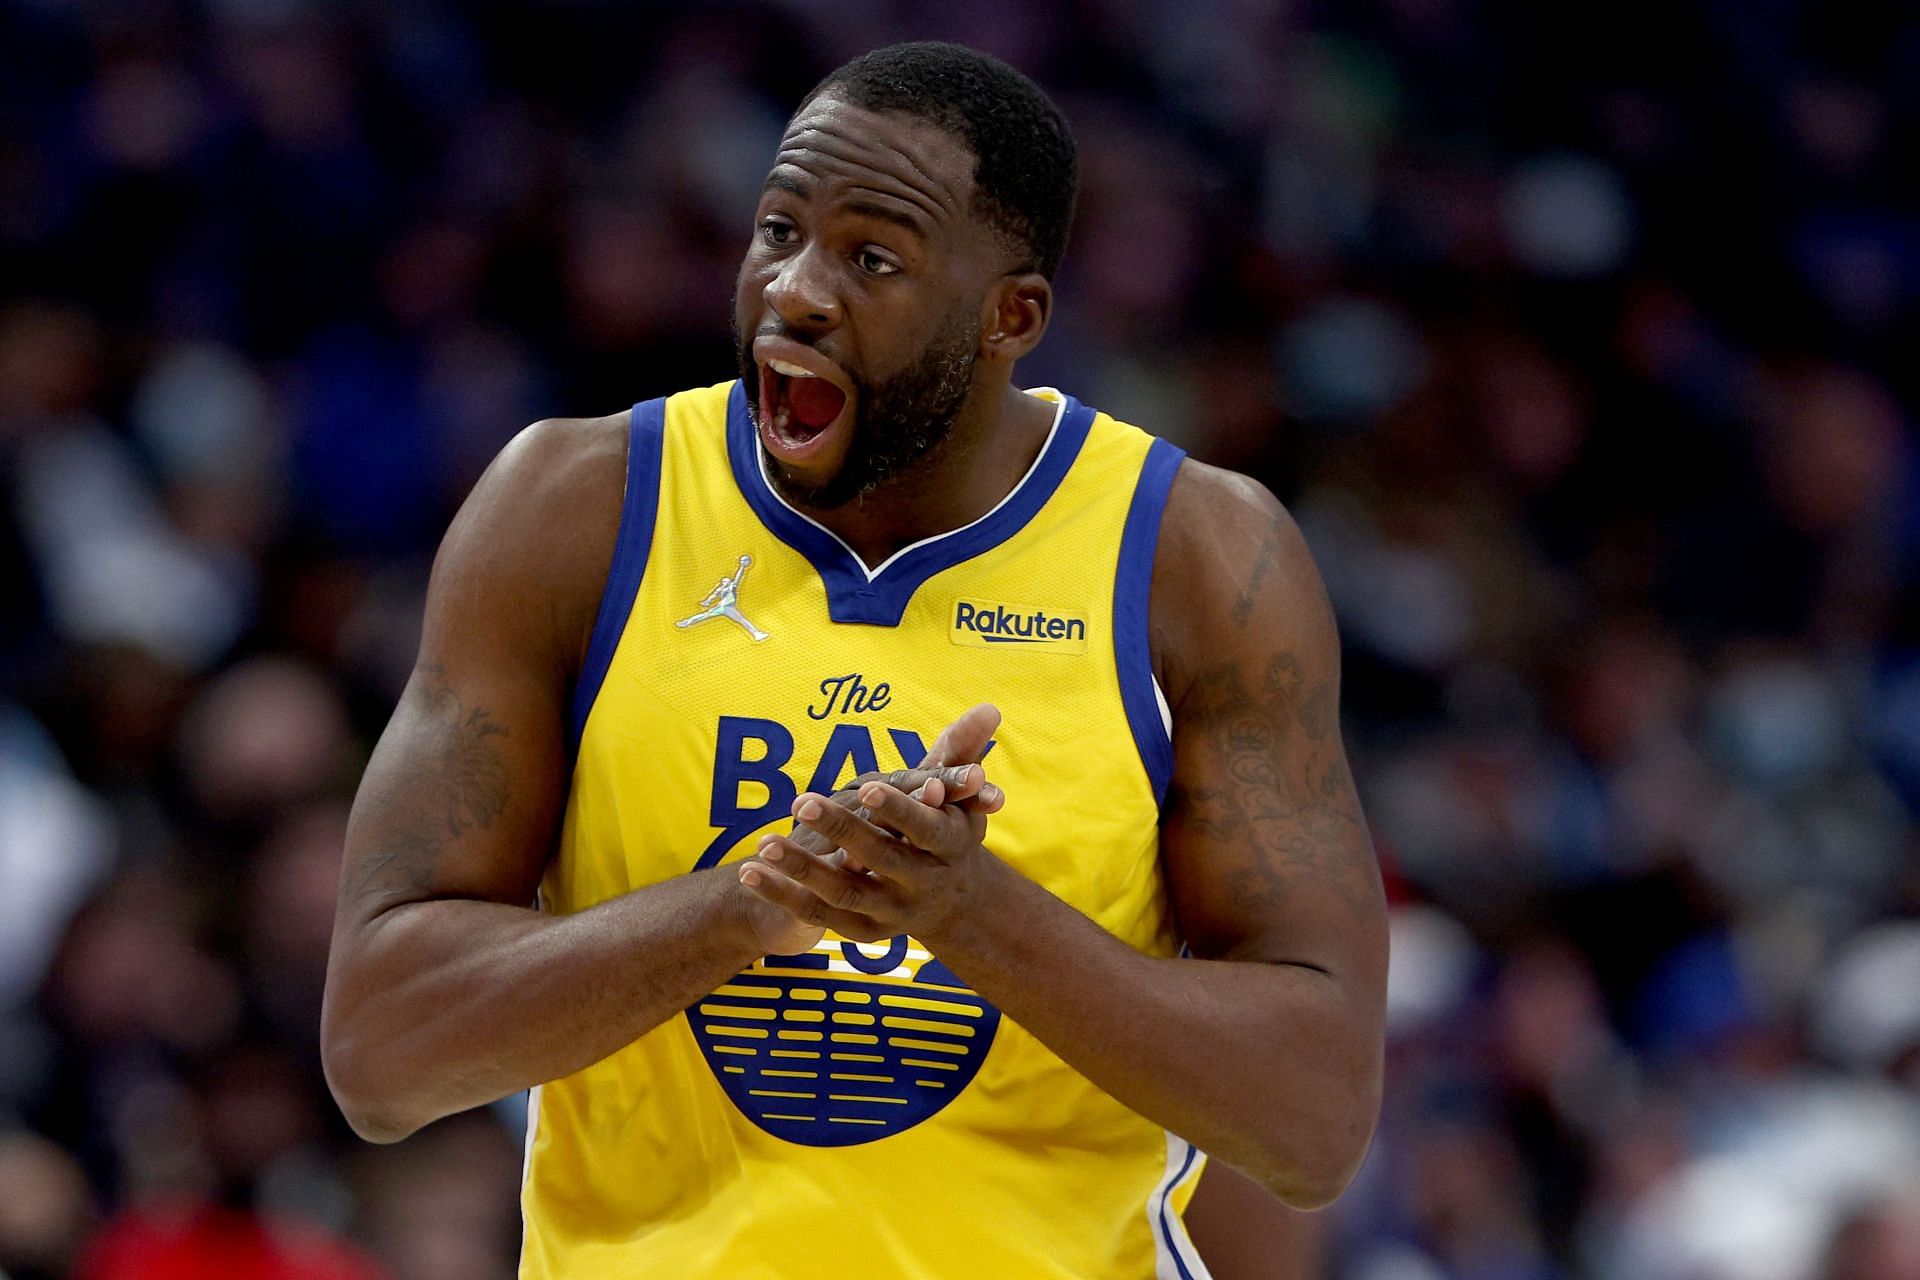 The Golden State Warriors are hoping to see Draymond Green back in action in the coming weeks